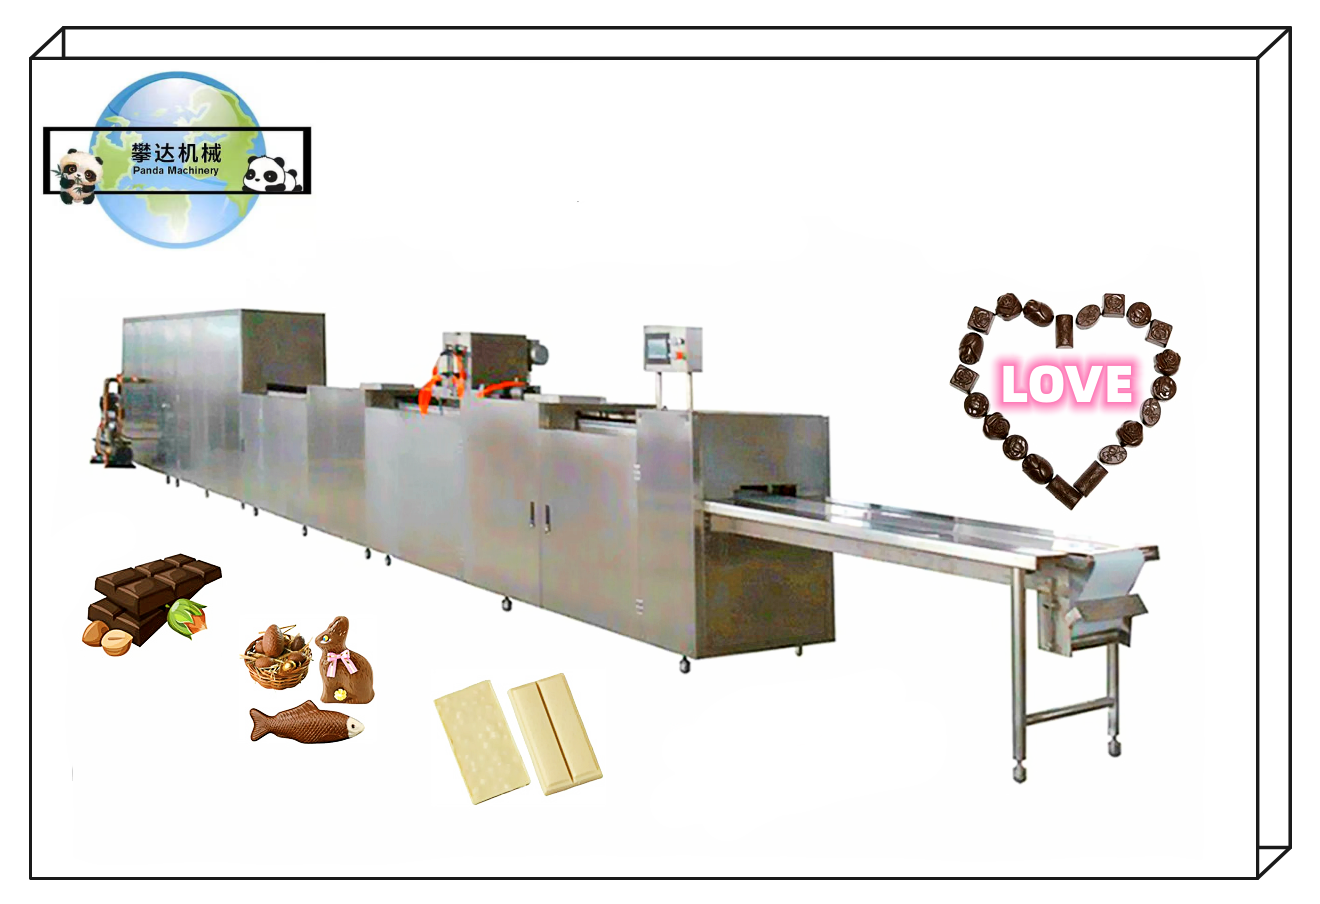 PD150 Automatic Chocolate Moulding Line Machine, Chocolate Bar Depositing Line, Chocolate Pouring Machine Equipment 2